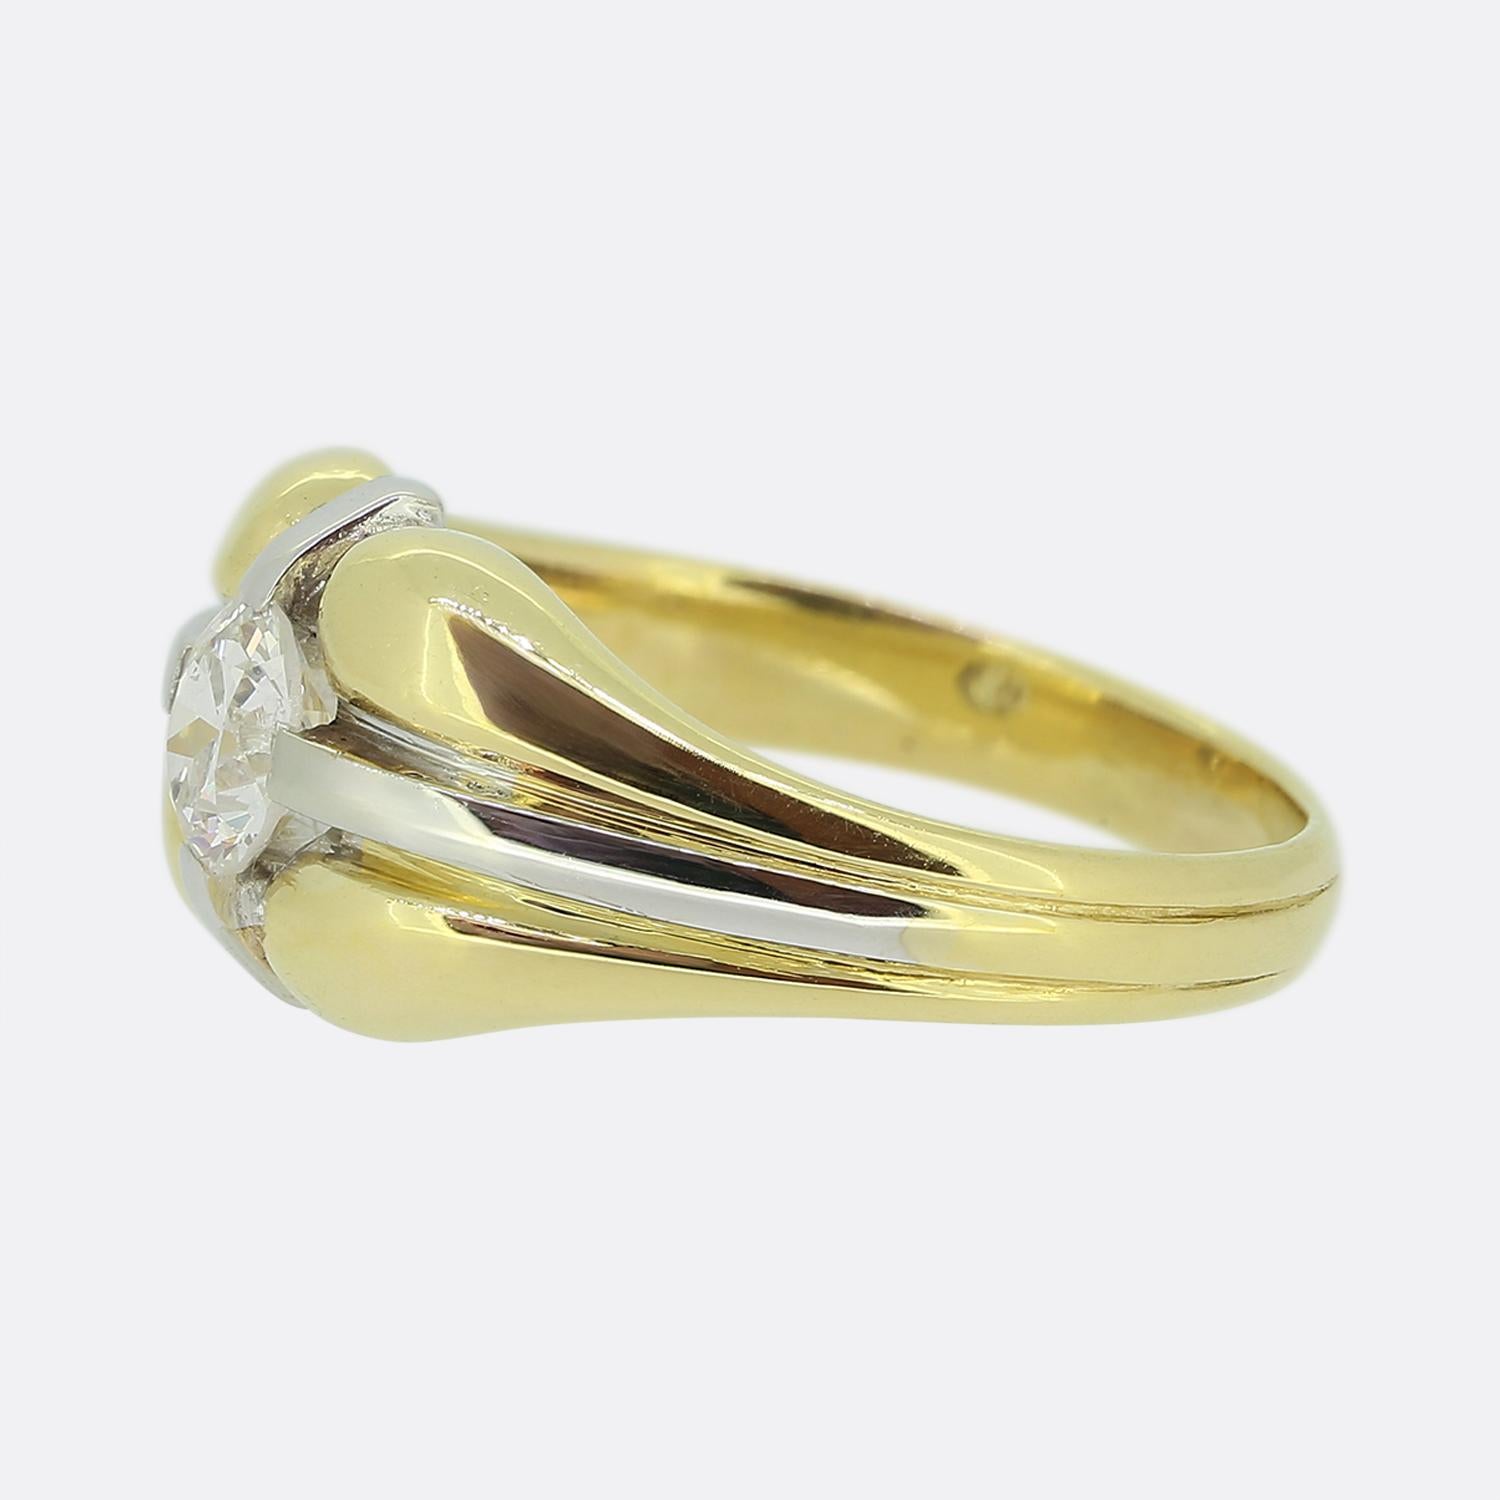 Here we have a wonderful single stone diamond ring. This vintage piece showcase a round faceted 0.45 carat old cut diamond at the centre of the face. This principal stone sits alone and proud atop a yellow gold bloated backdrop with a white gold